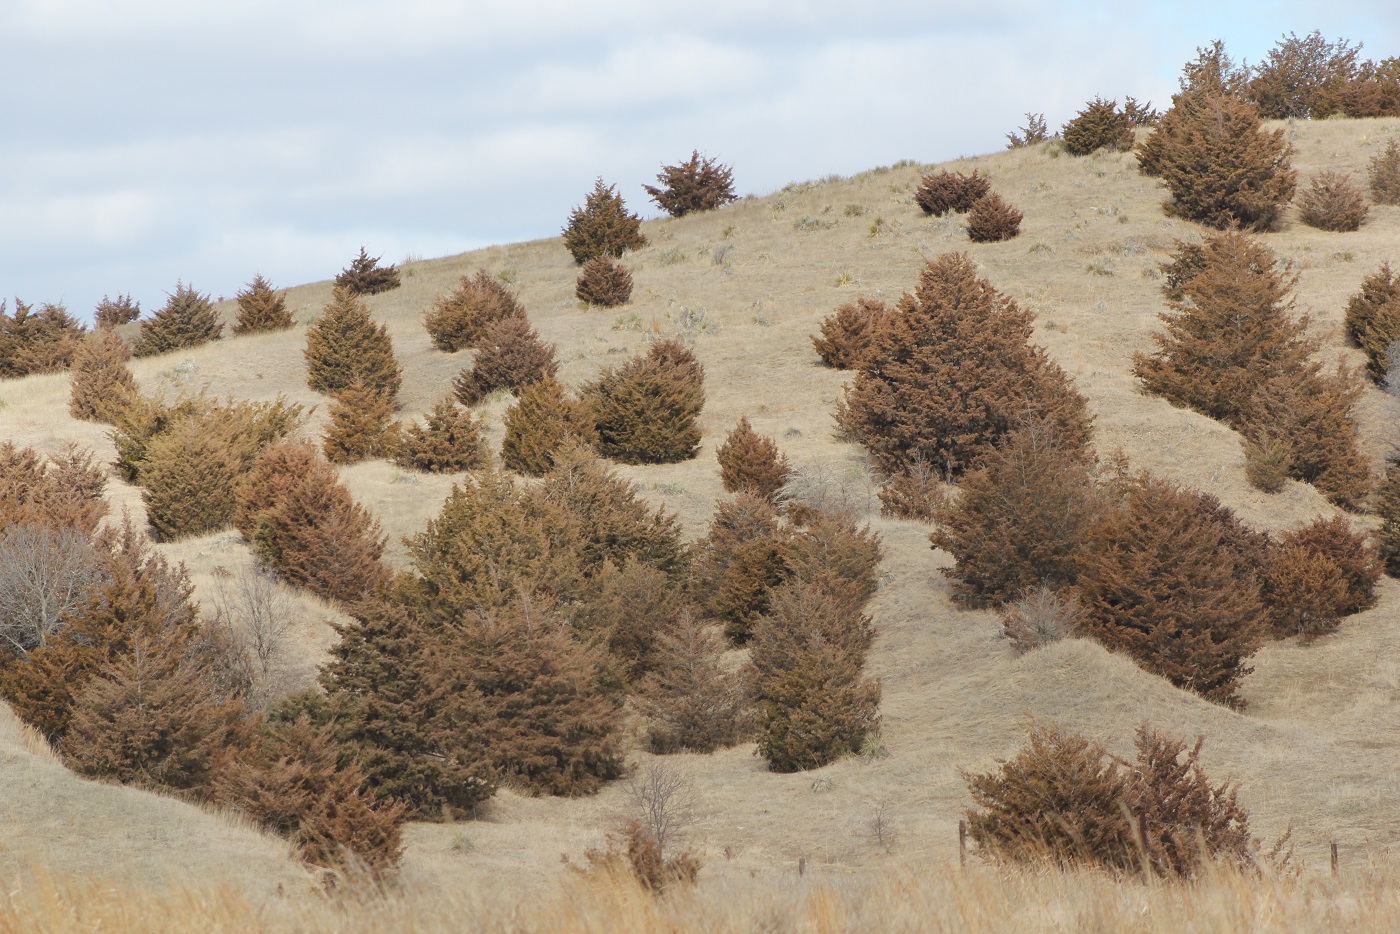 As cedars continue to expand in Nebraska, the School Land Trust has initiated an aggressive campaign to protect grazing revenue and halt cedar invasions onto Trust lands. Photo courtesy of Troy Walz.